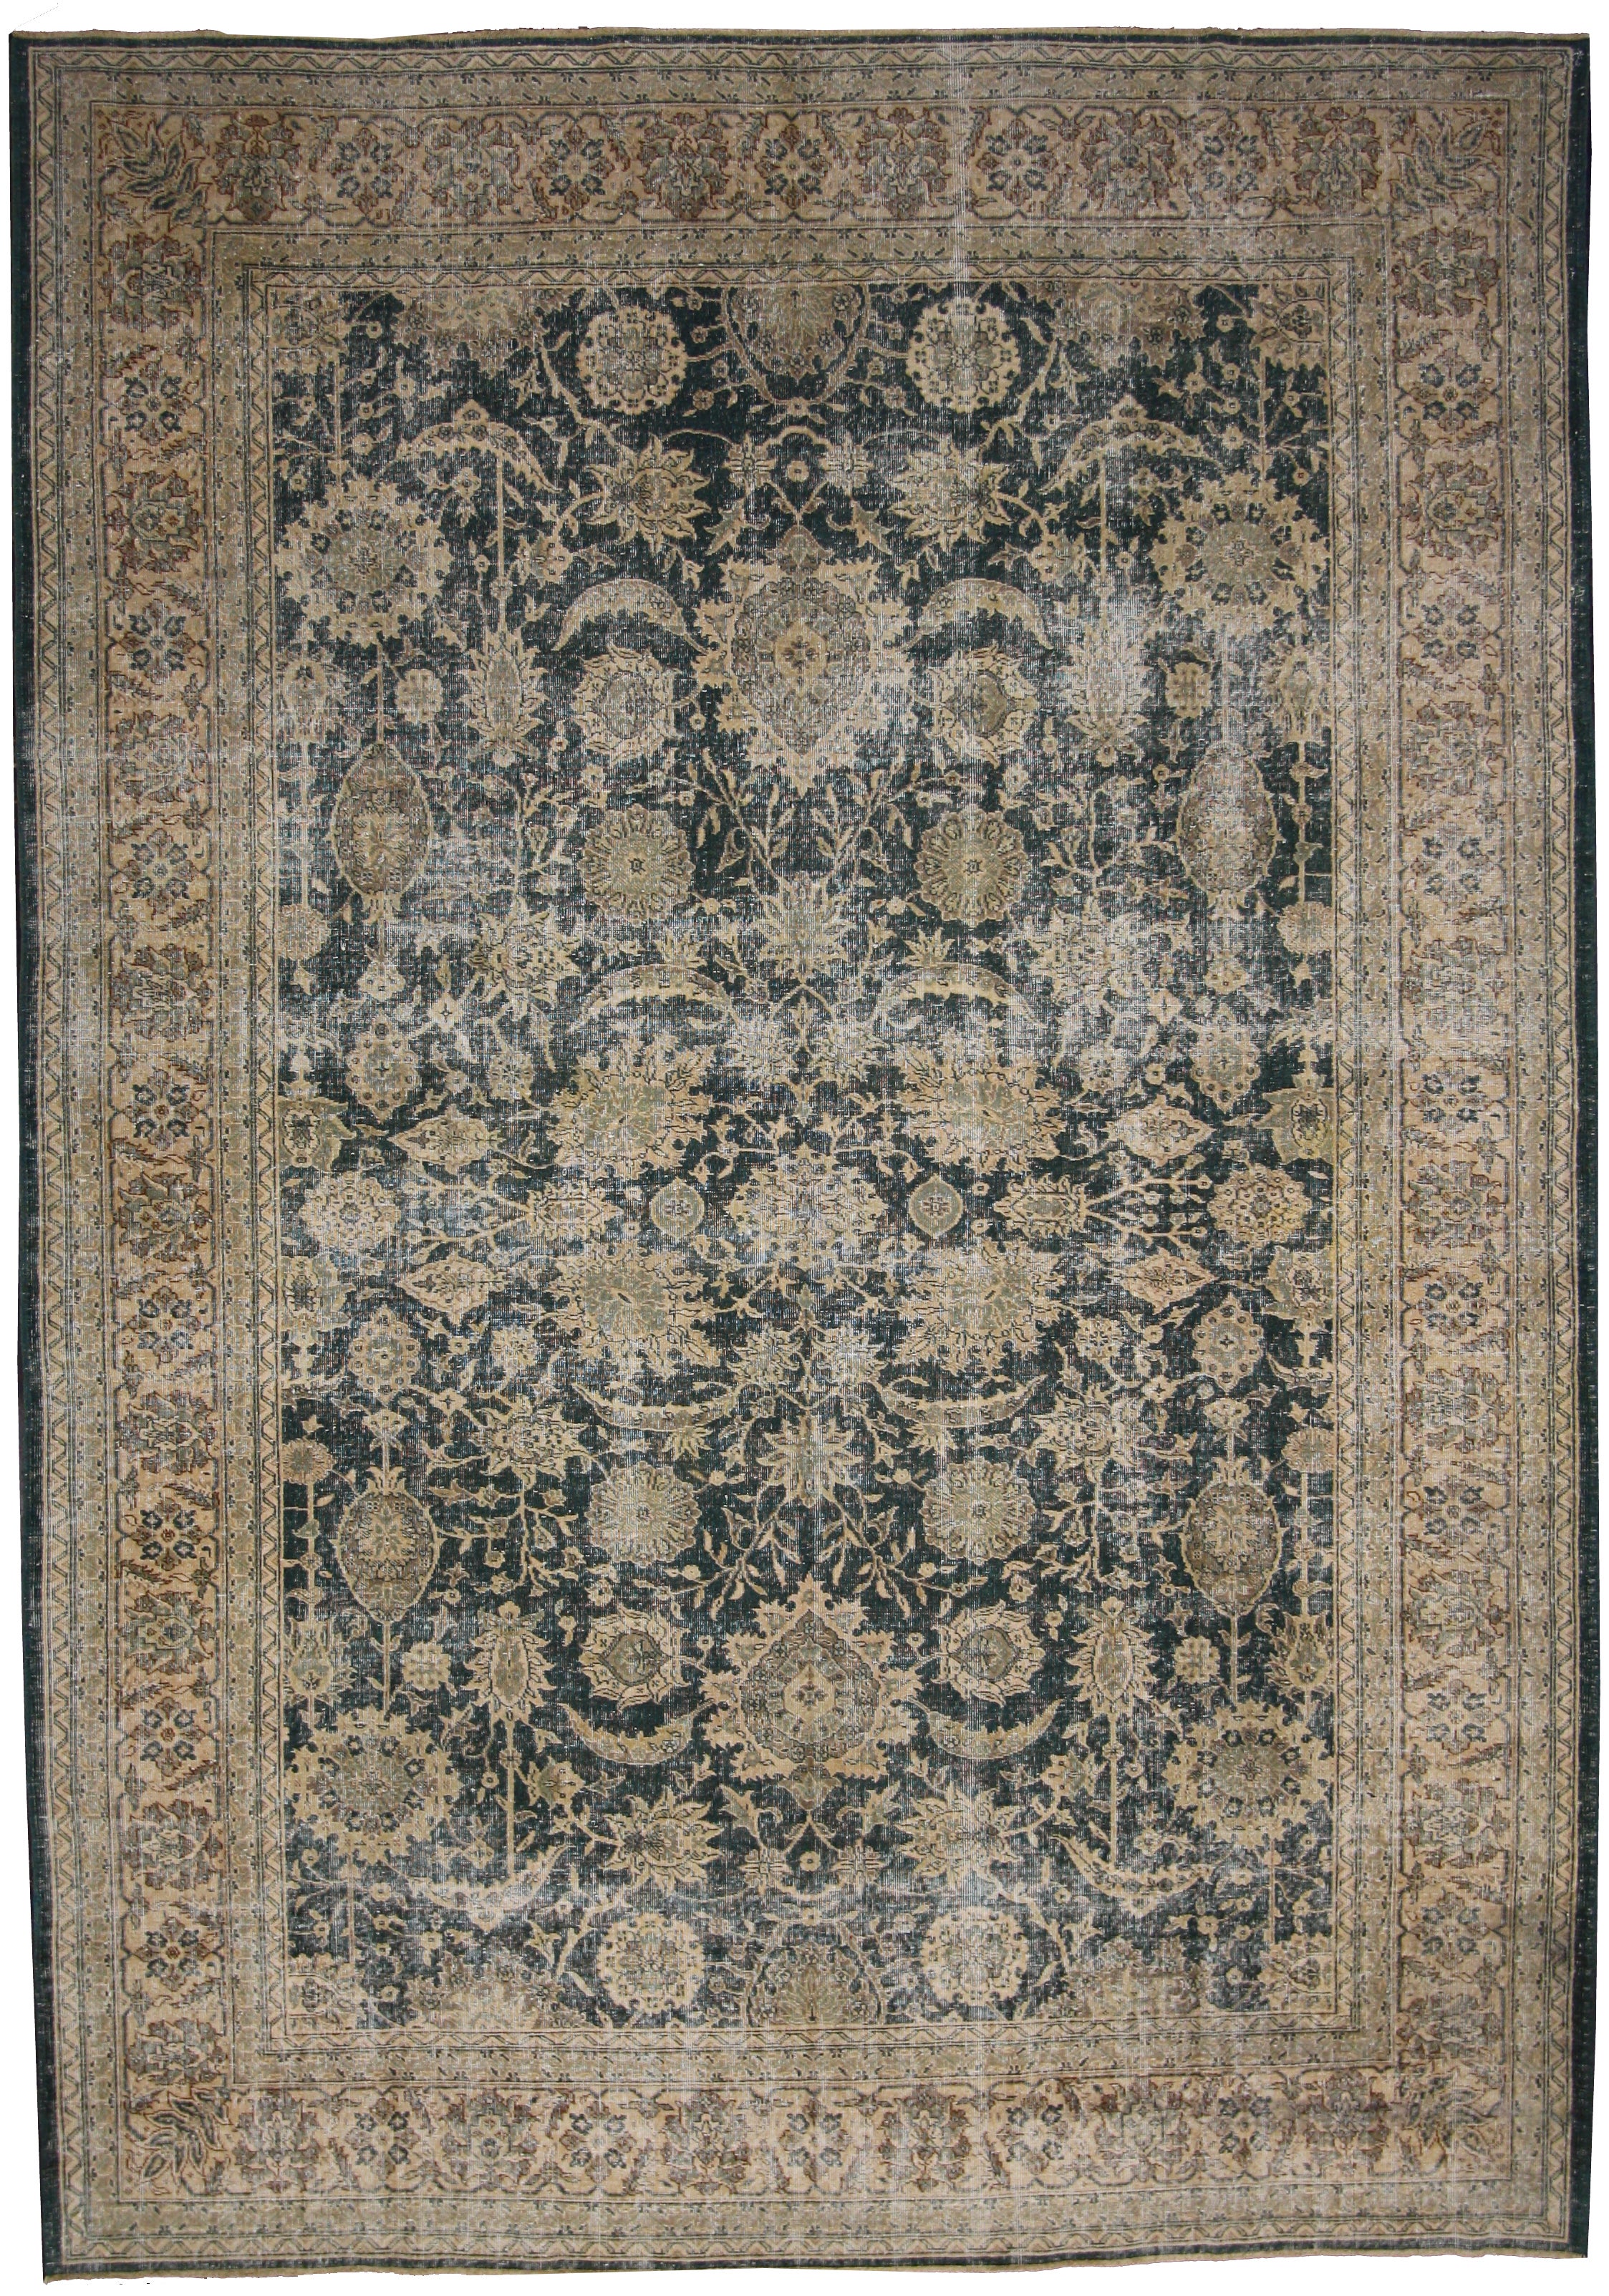 Distressed Vintage Turkish Sivas Area Rug with Industrial Artisan Style For Sale